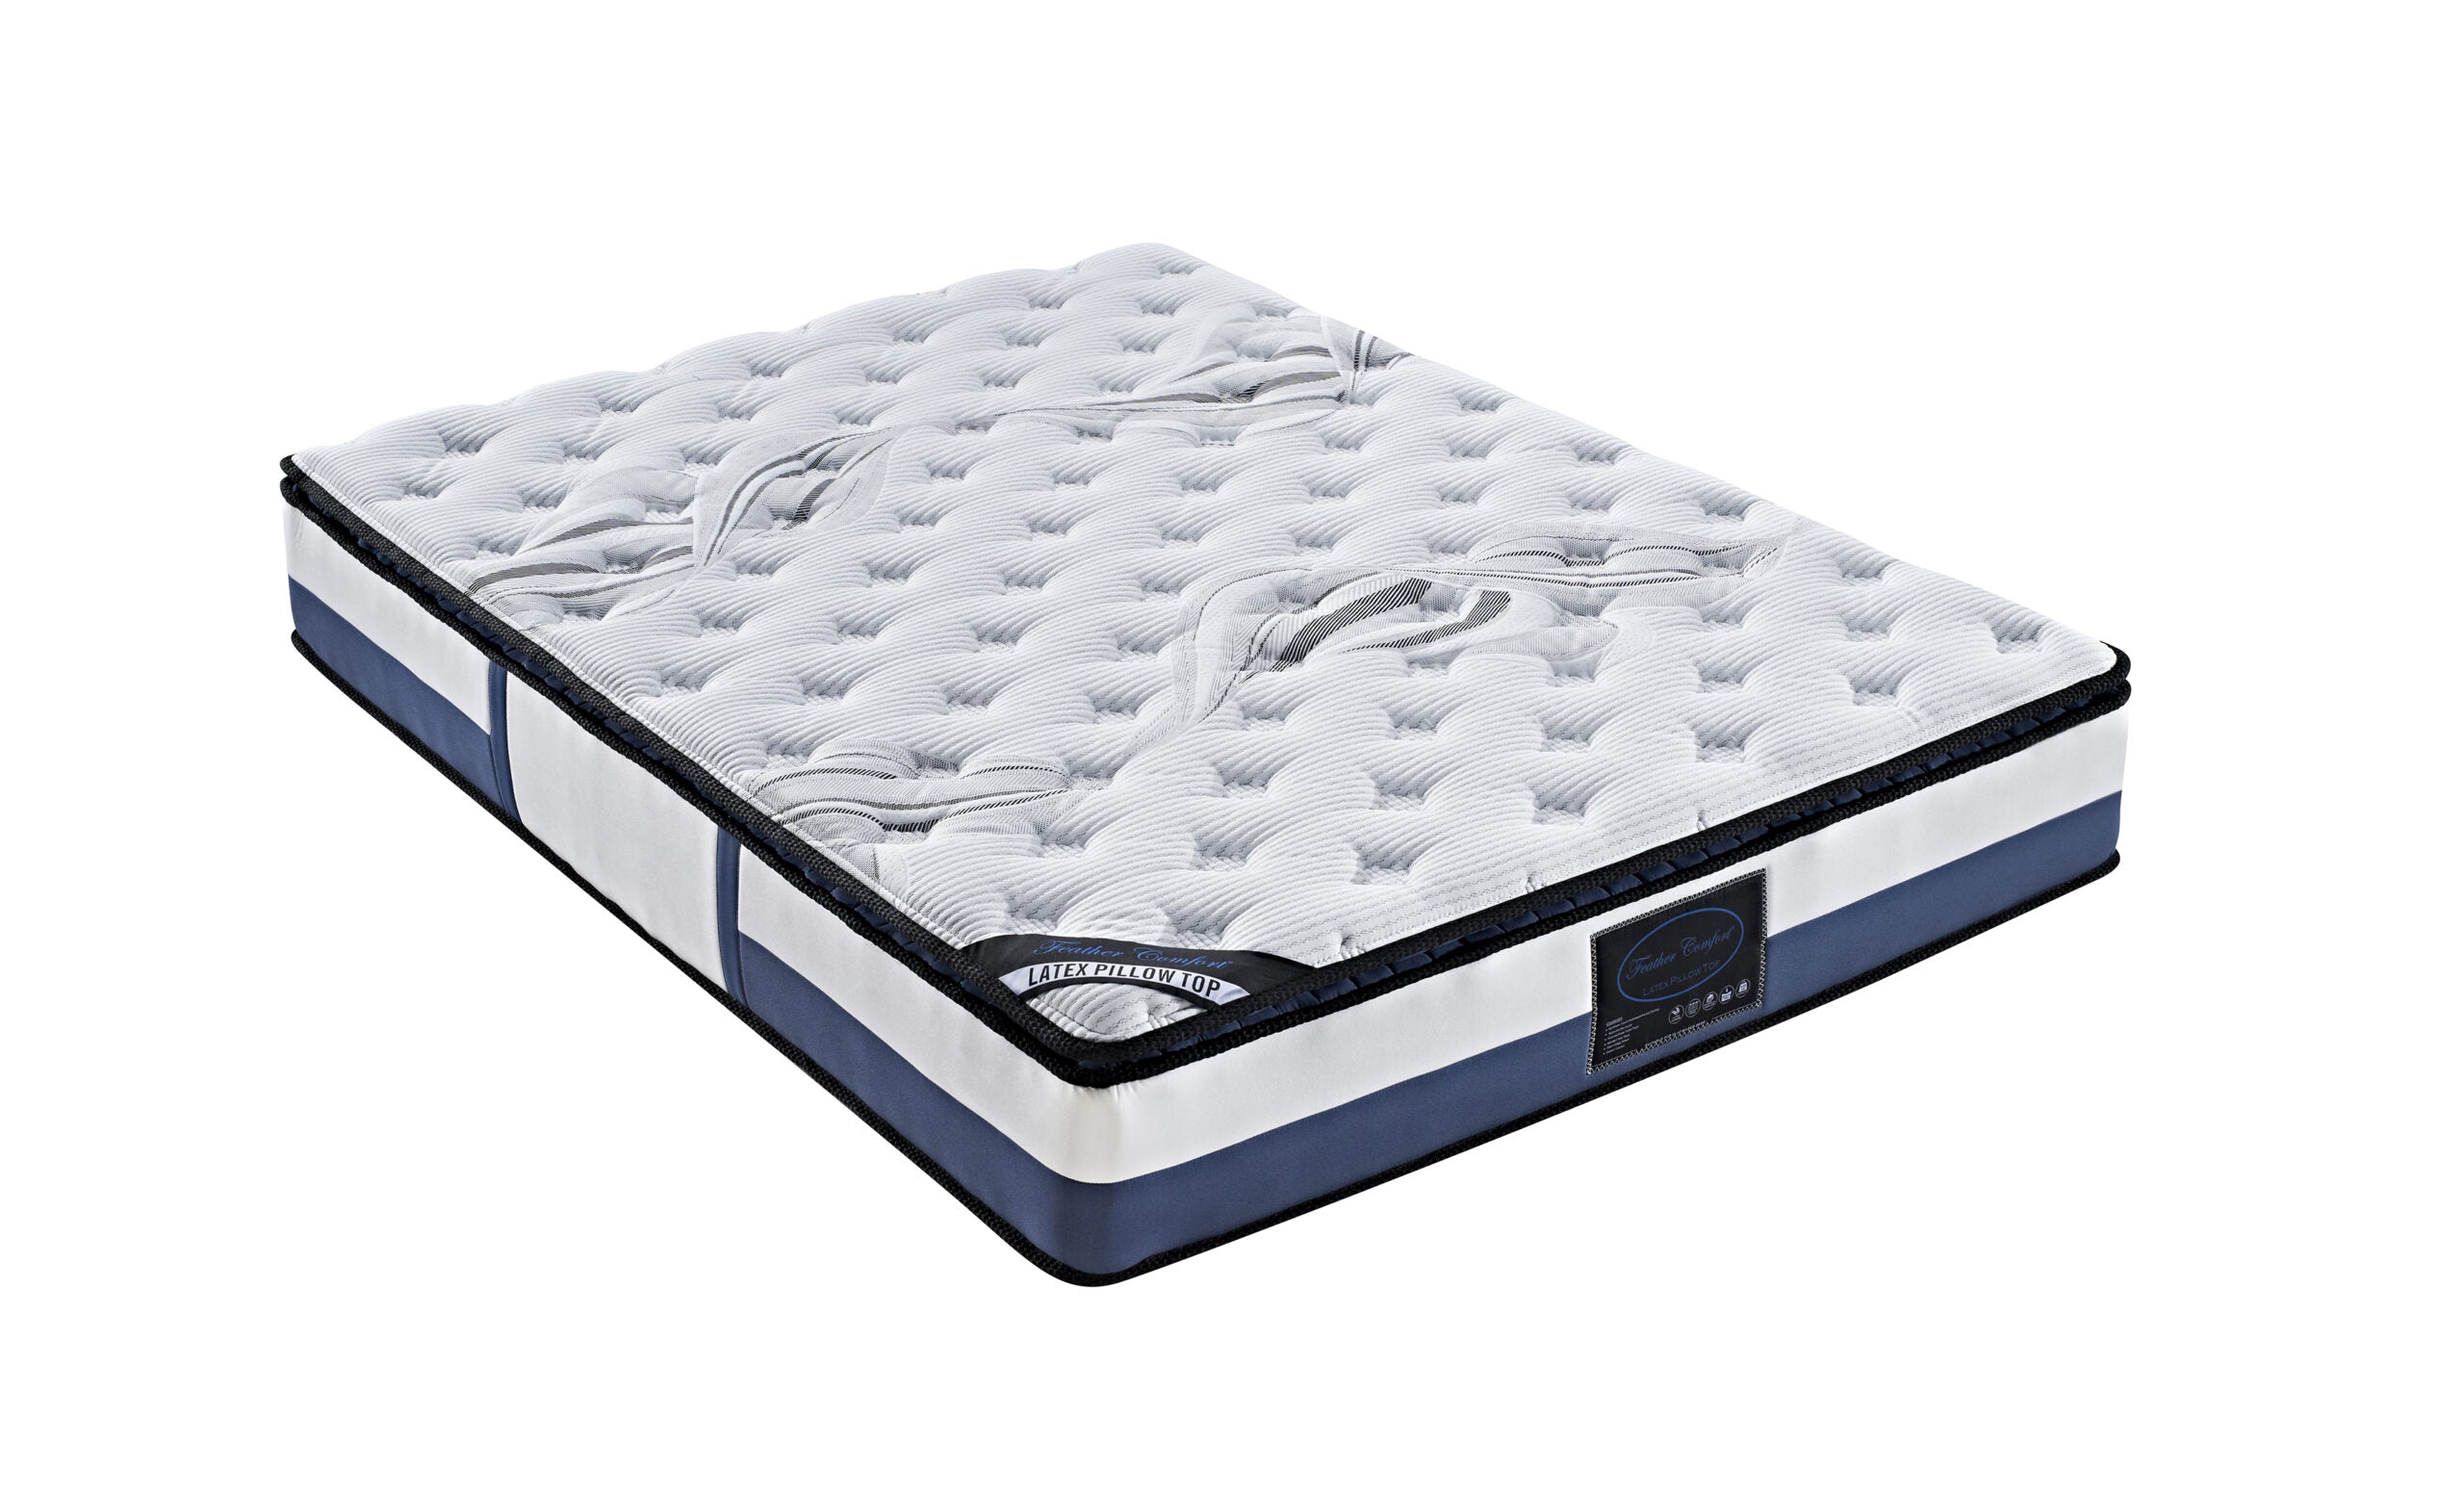 New Latex Pillowtop Rolled up Mattress King Size